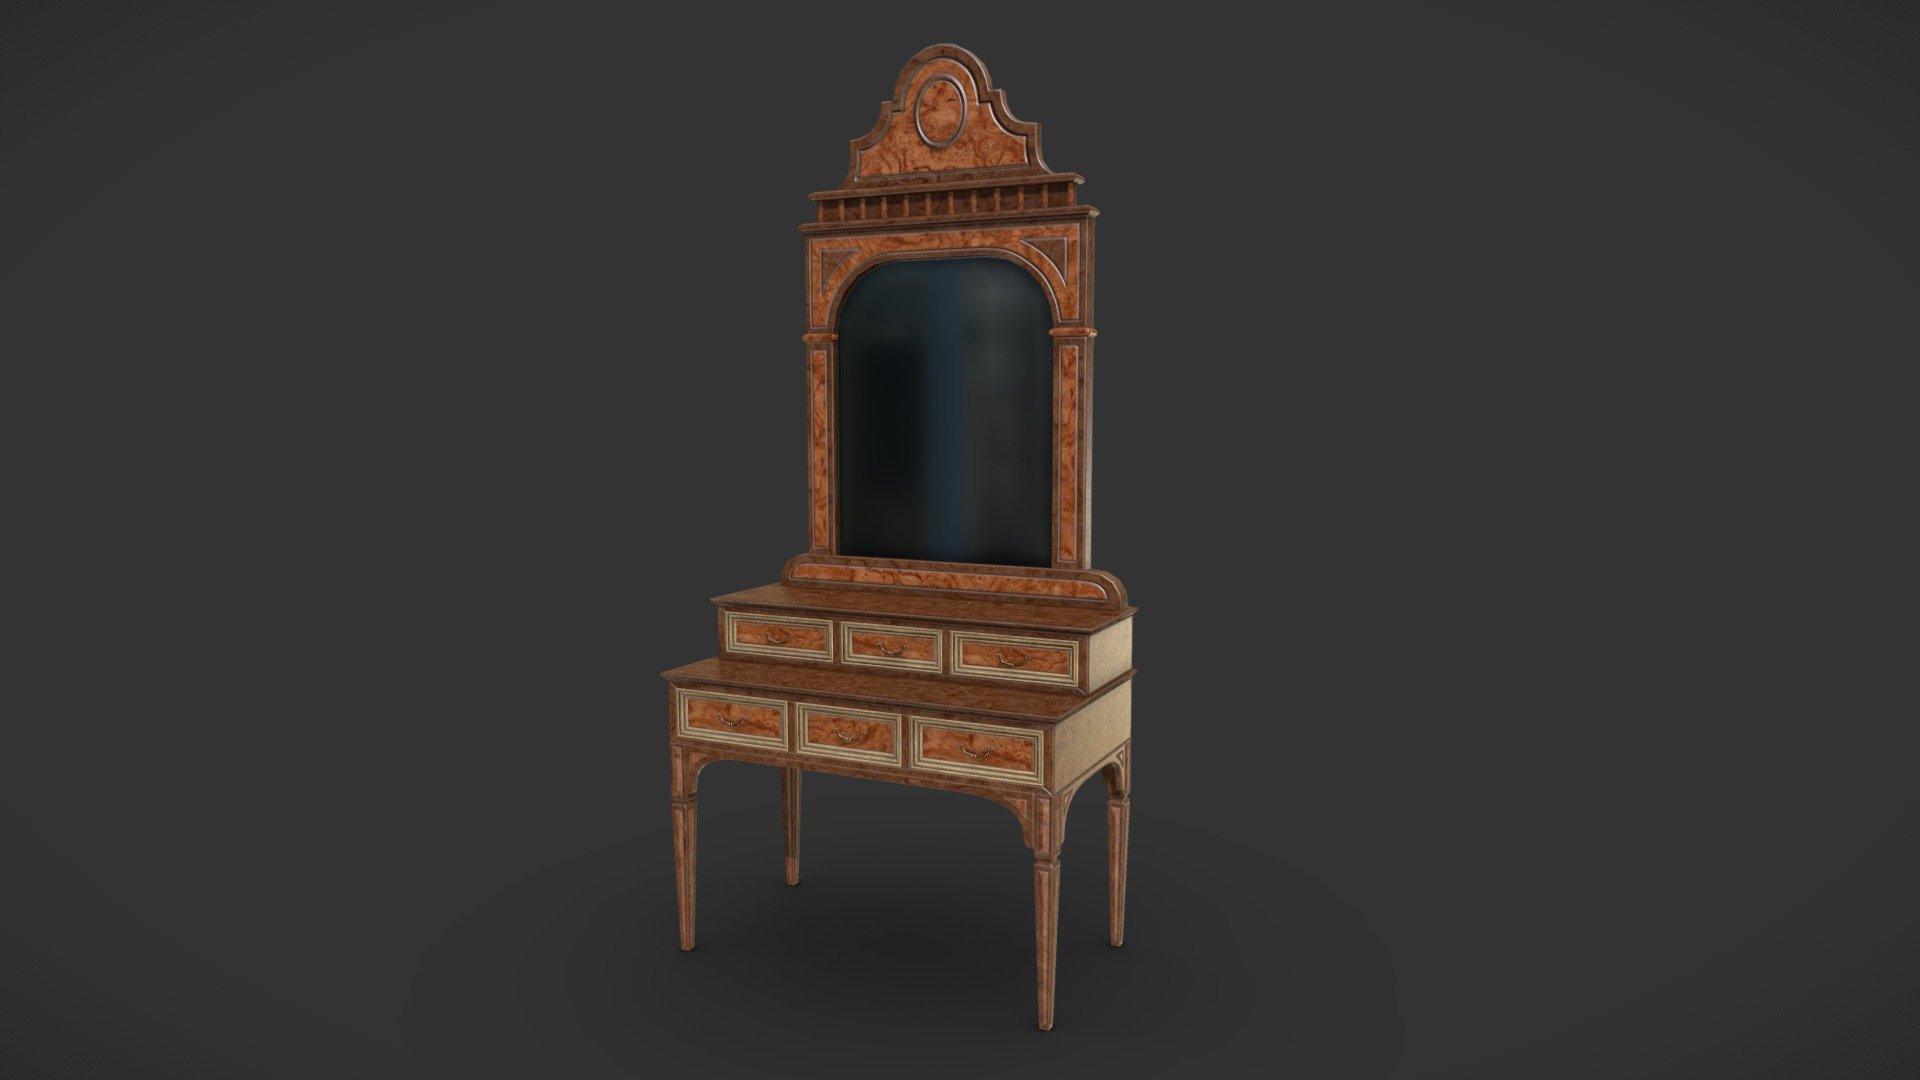 I made this Dressing Table for Russian Estate House pack for UE4 as a prop for Bedroom 3d model